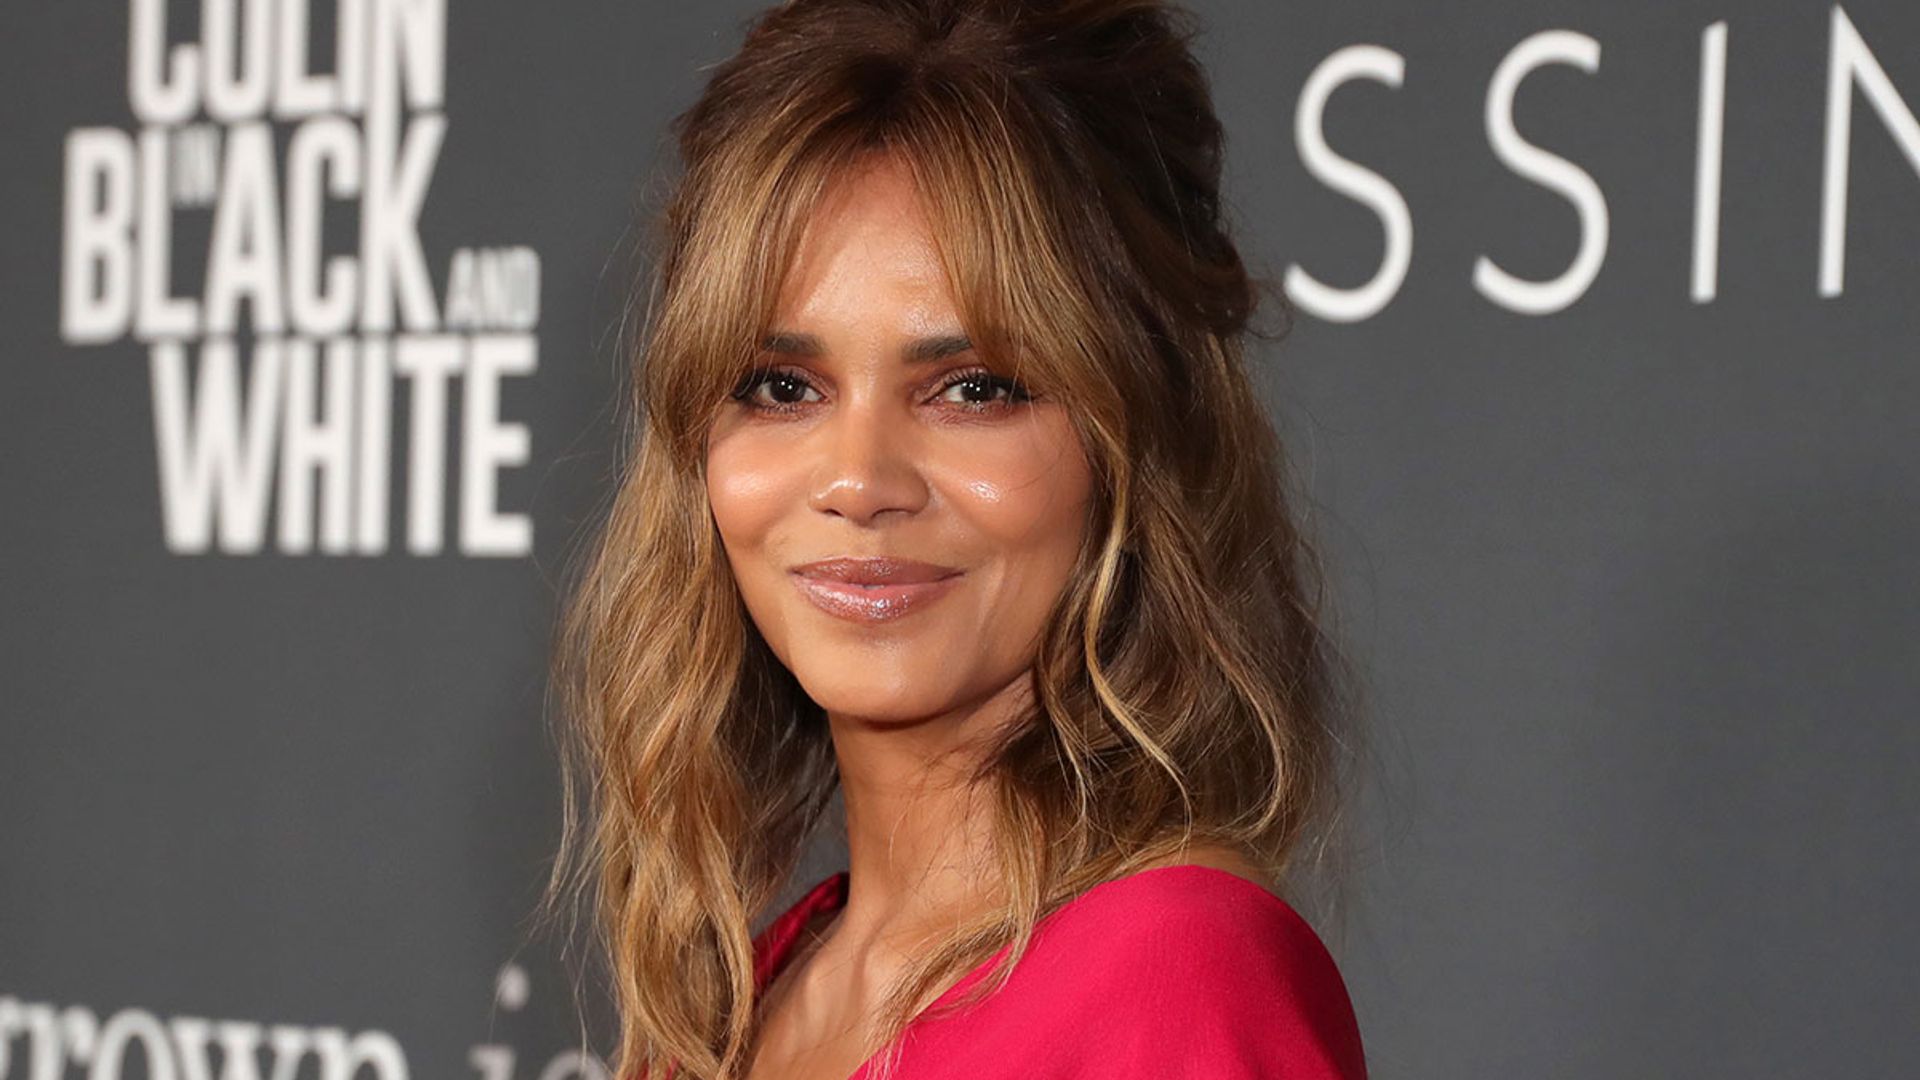 Halle Berry stuns in corset and power suit during emotional speech at Critics Choice Awards 2022